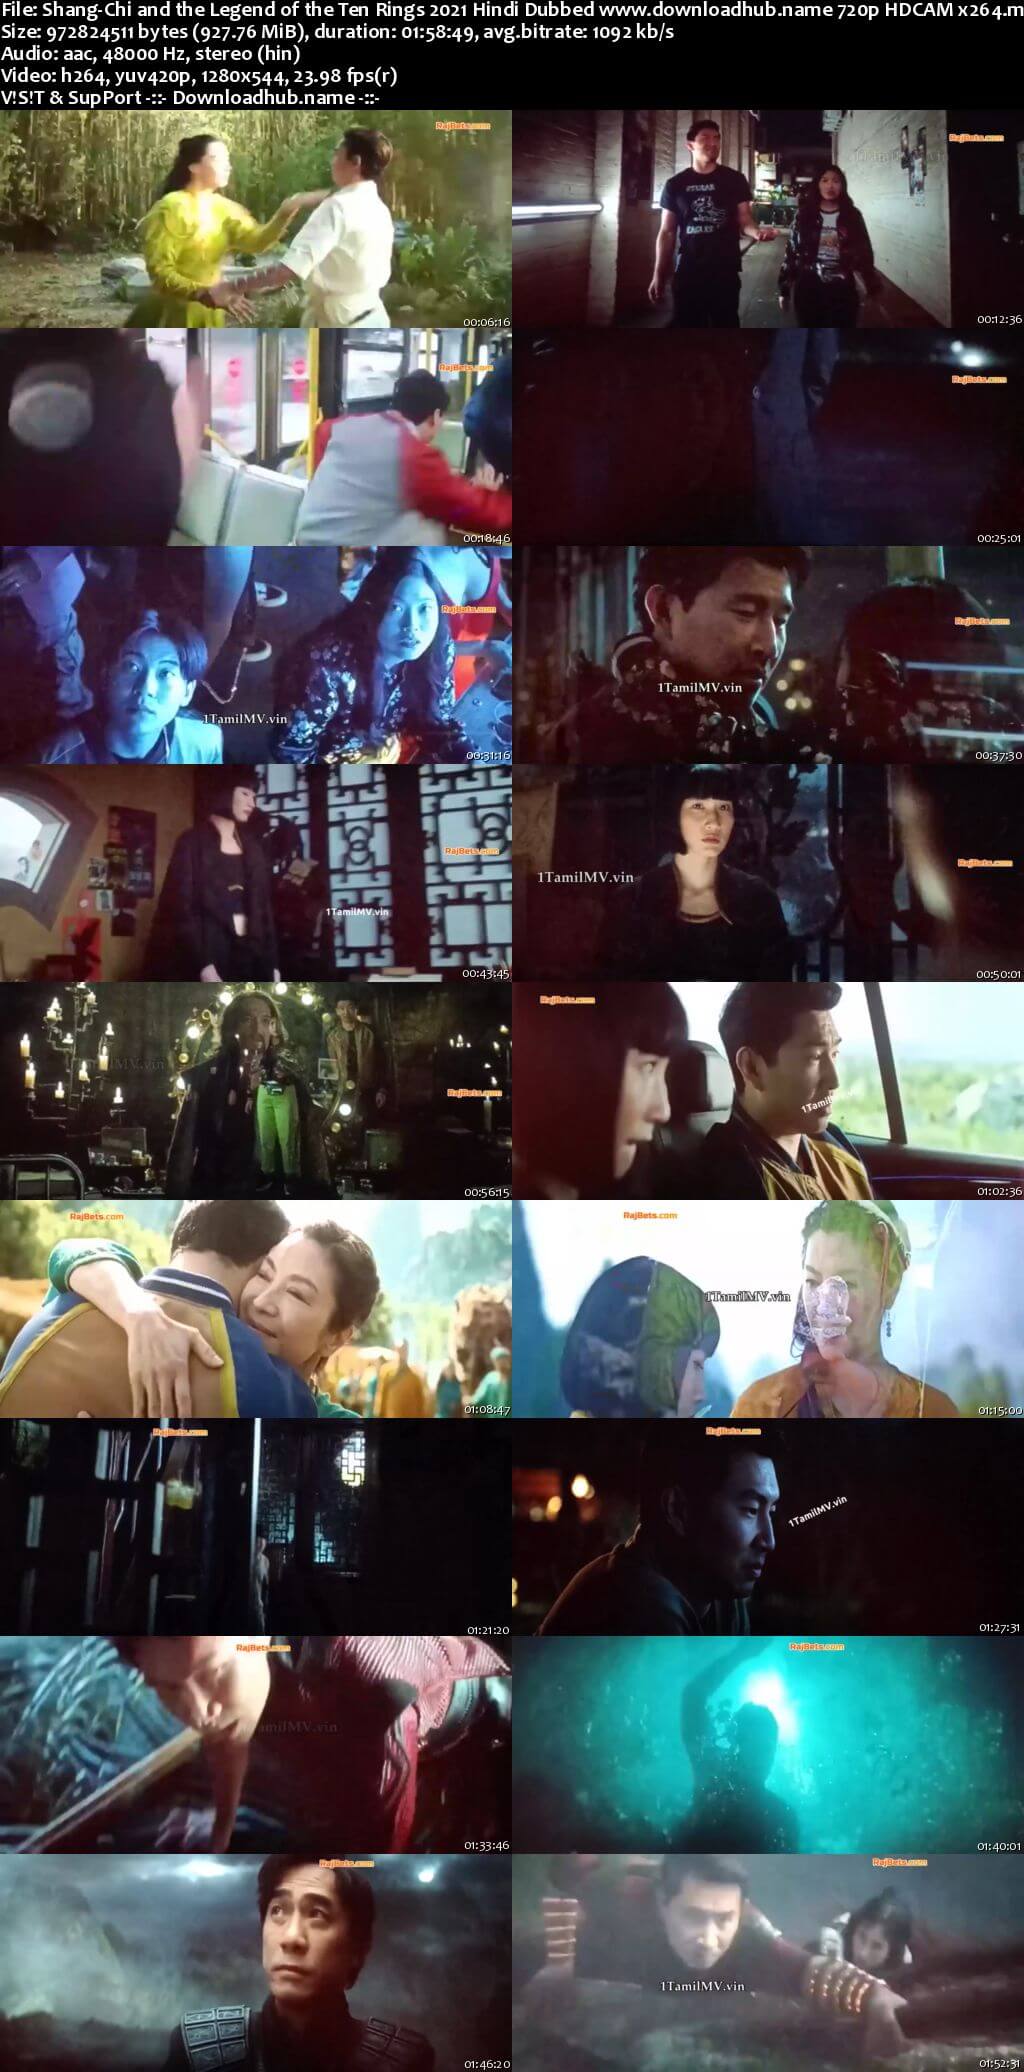 Shang-Chi and the Legend of the Ten Rings 2021 Hindi Dubbed 720p HDCAM x264